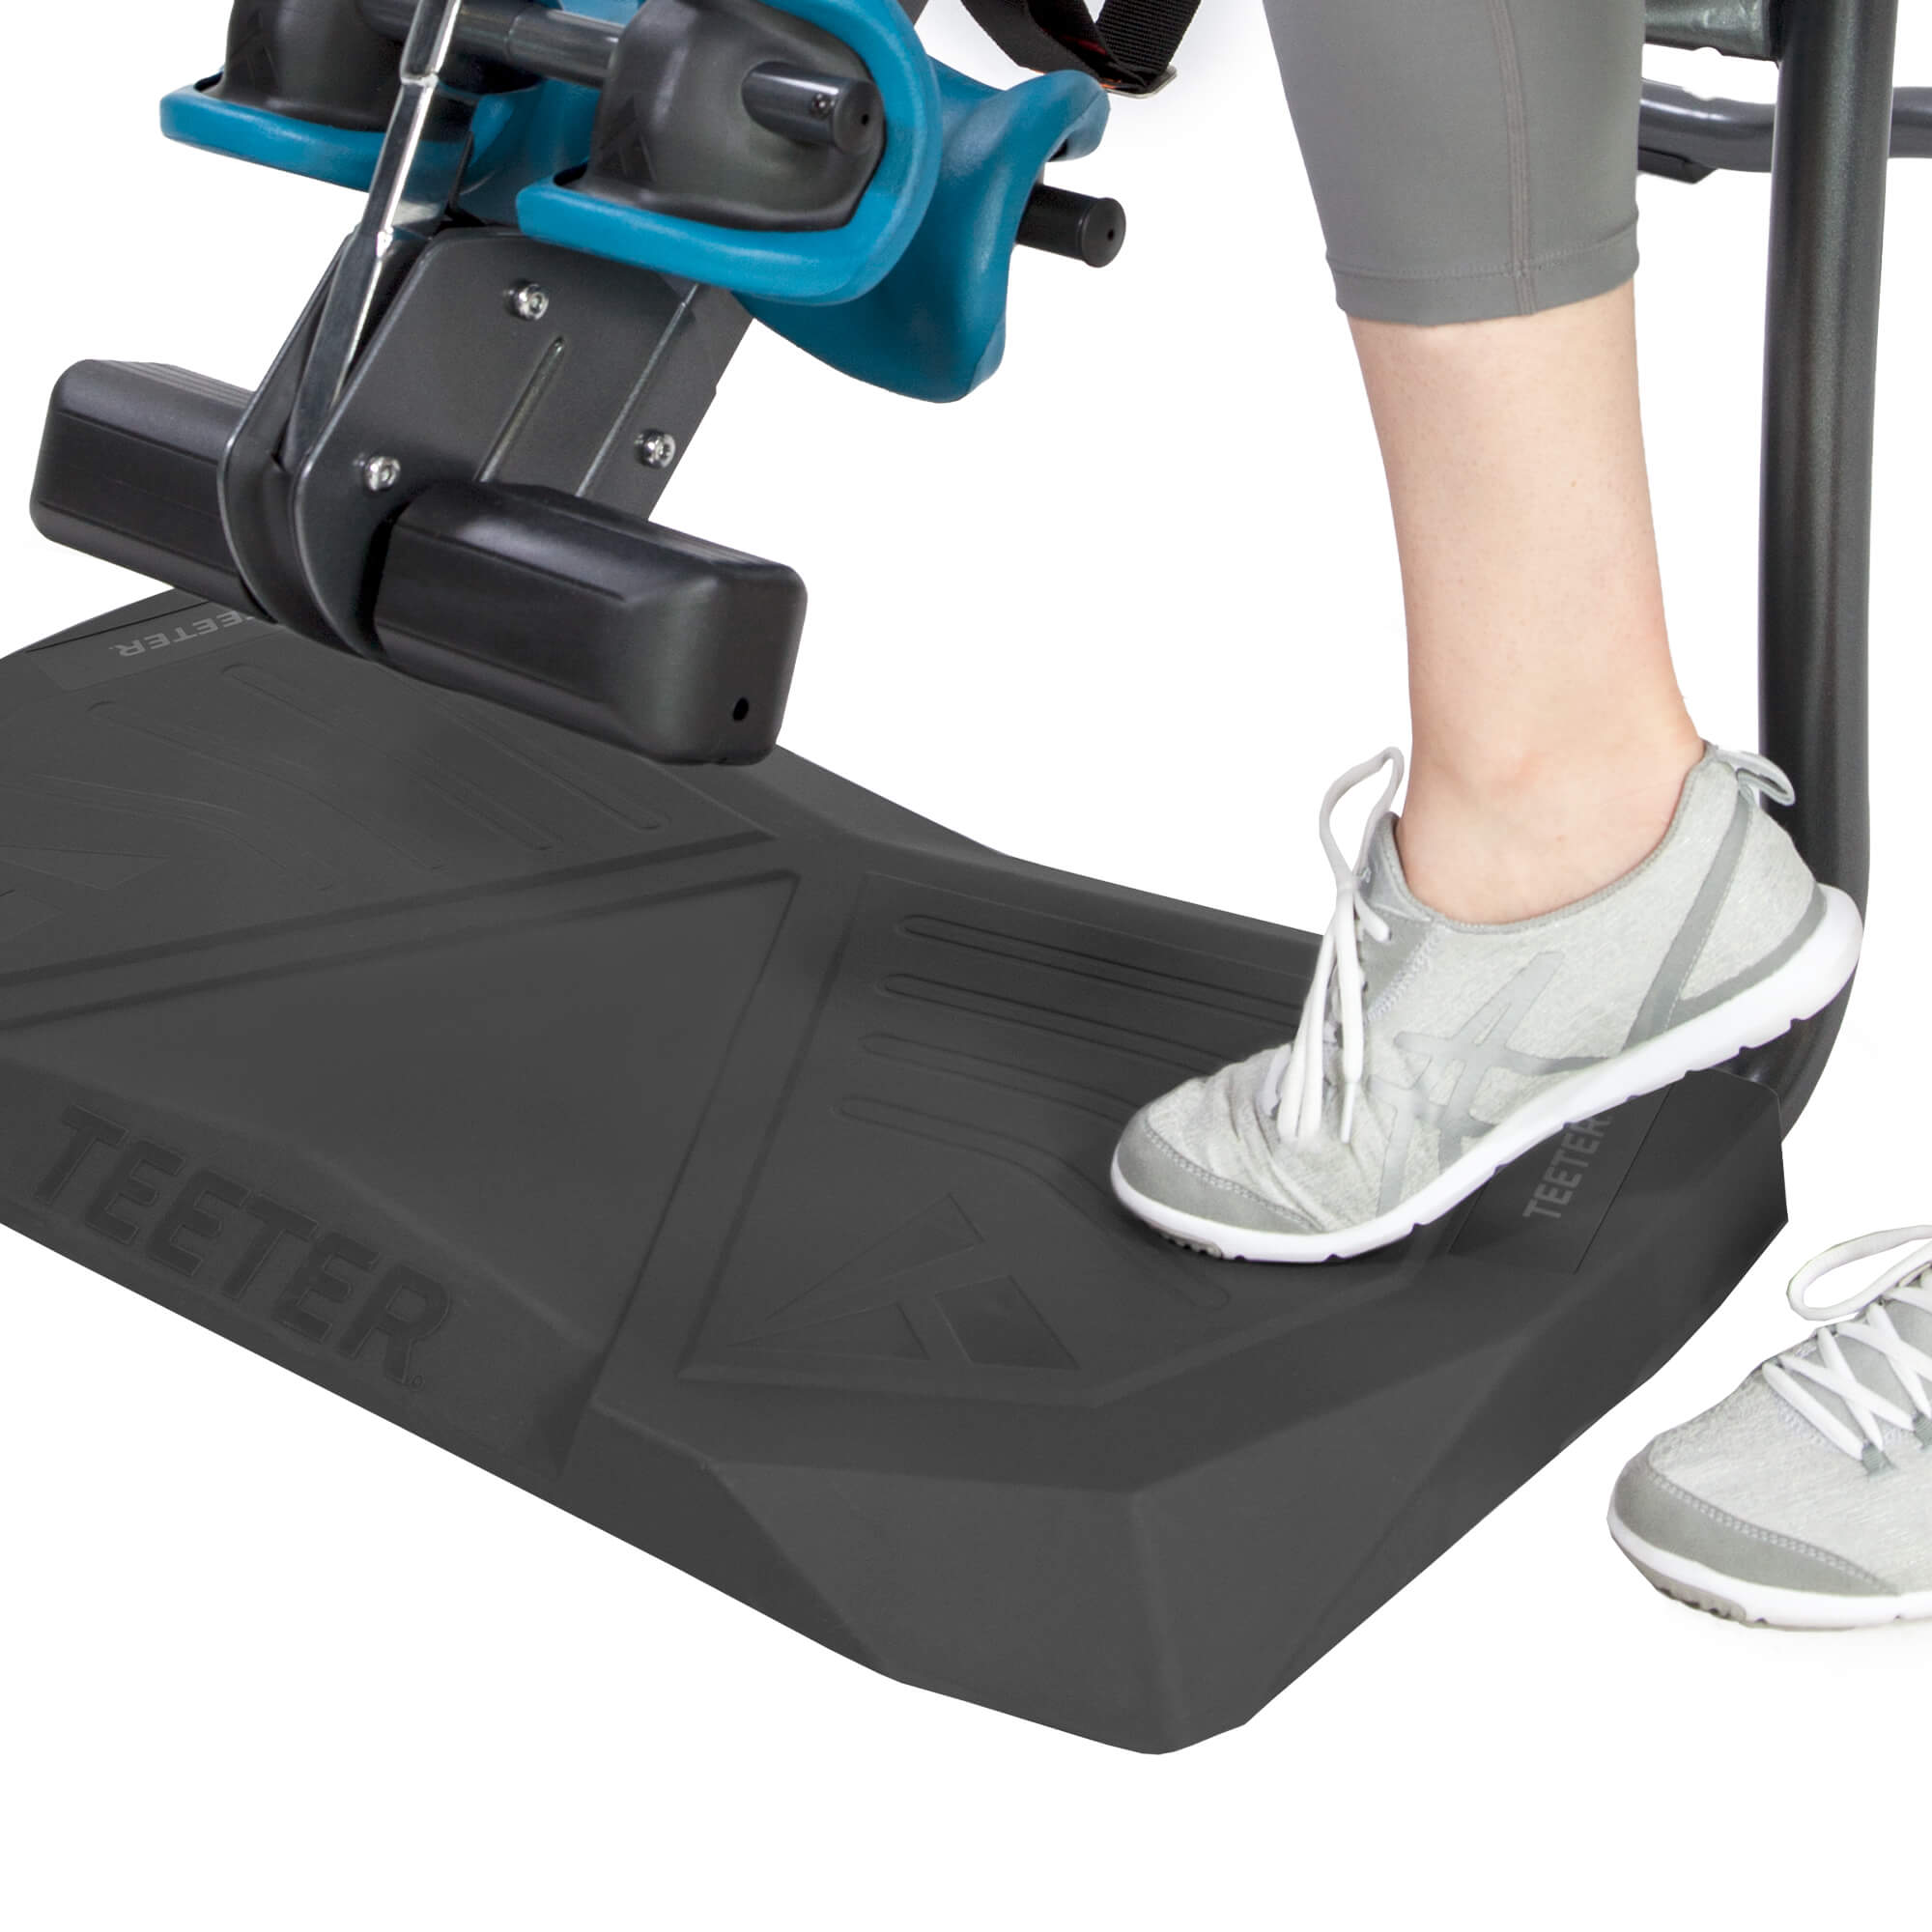 Teeter Inversion Table FitSpine LX9